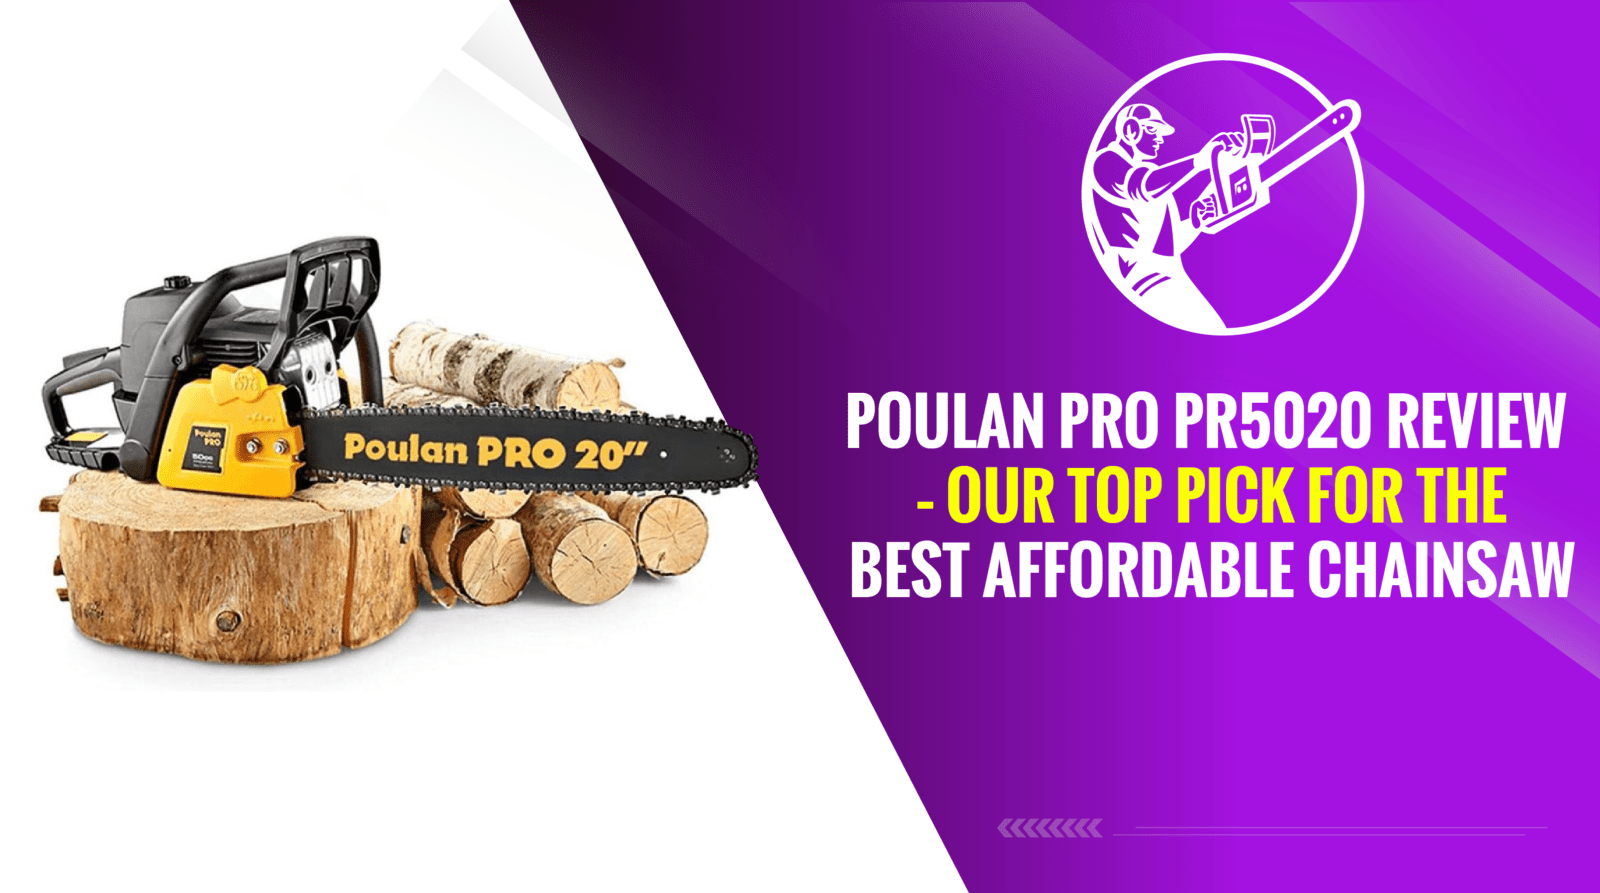 Poulan Pro PR5020 Review – Our Top Pick for the Best Affordable Chainsaw